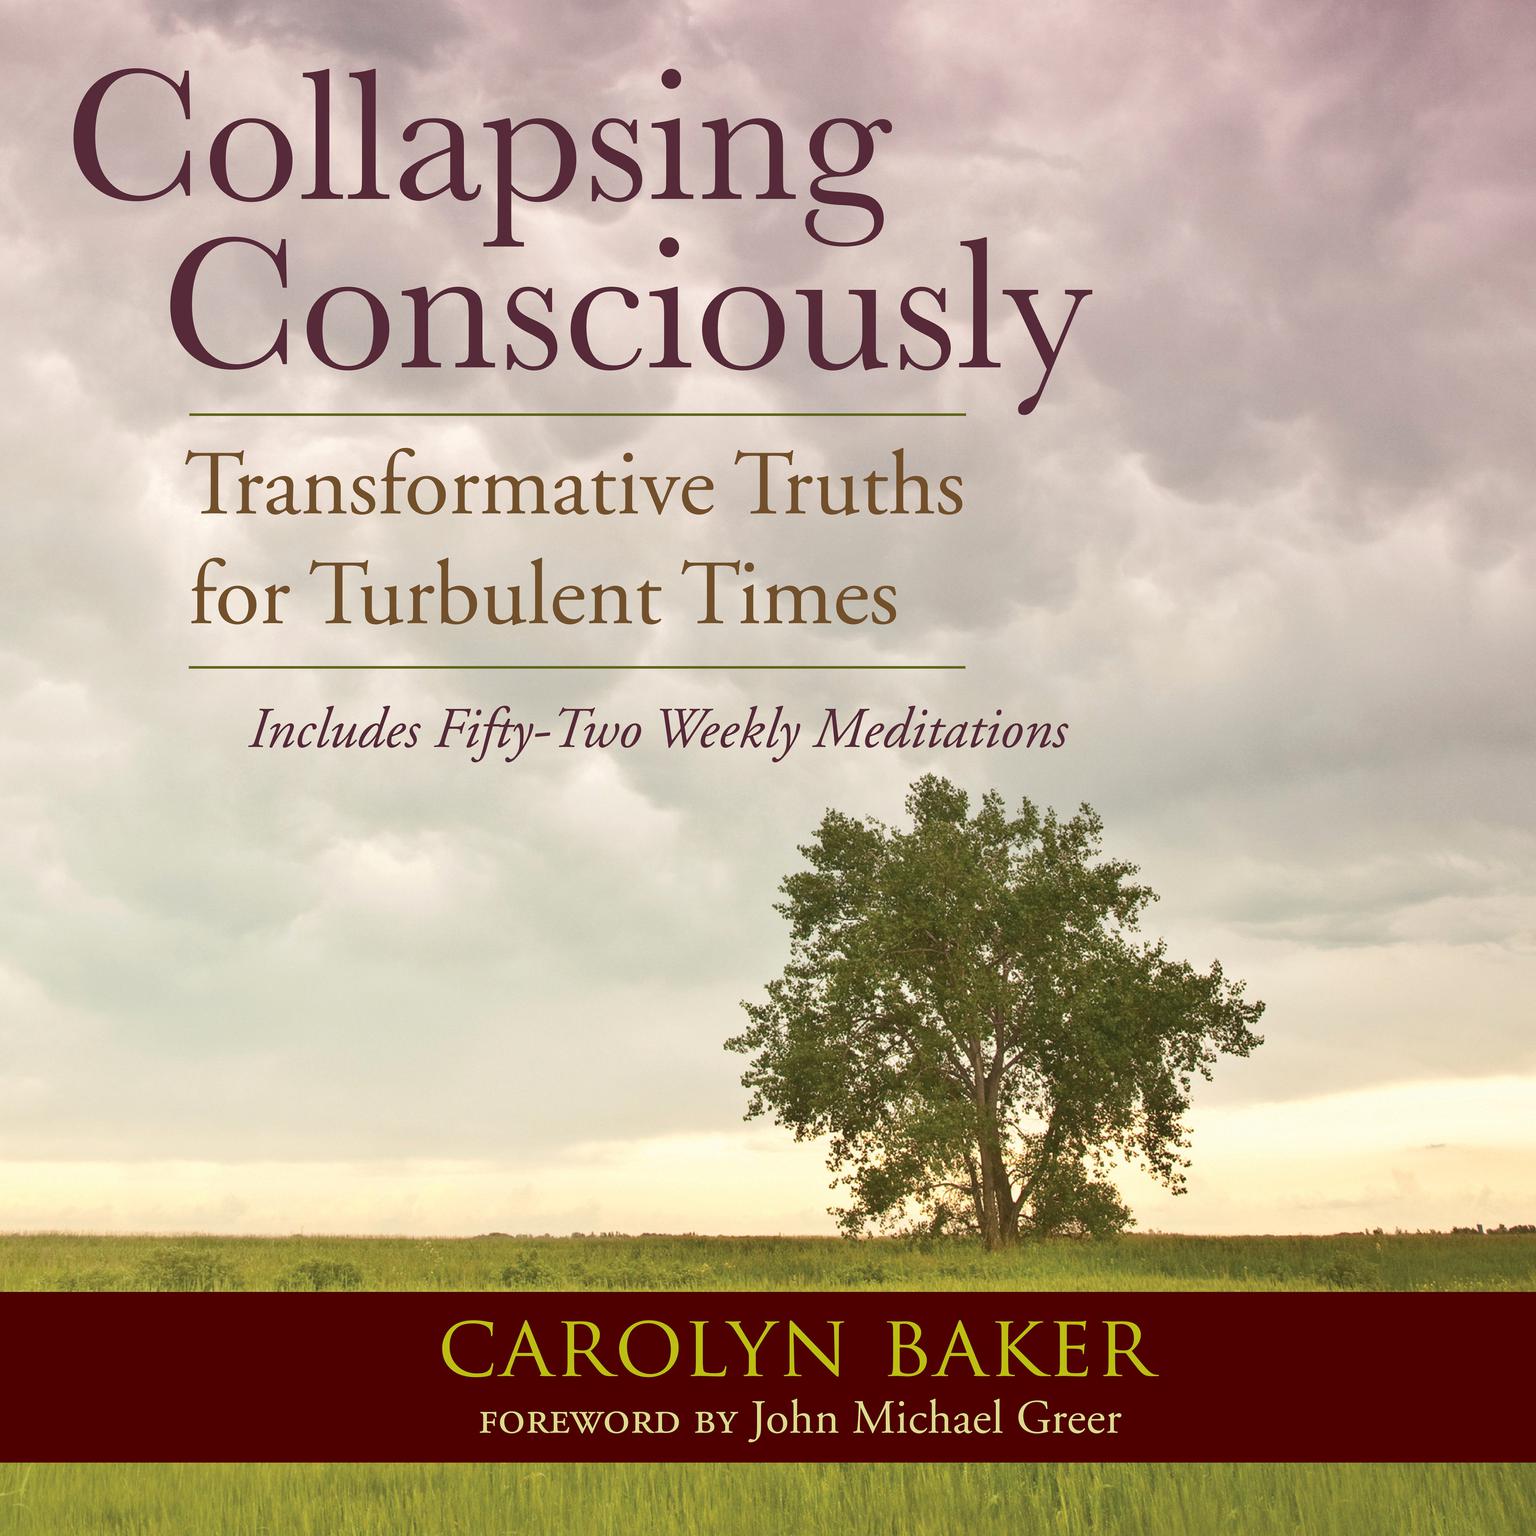 Collapsing Consciously: Transformative Truths for Turbulent Times Audiobook, by Carolyn Baker